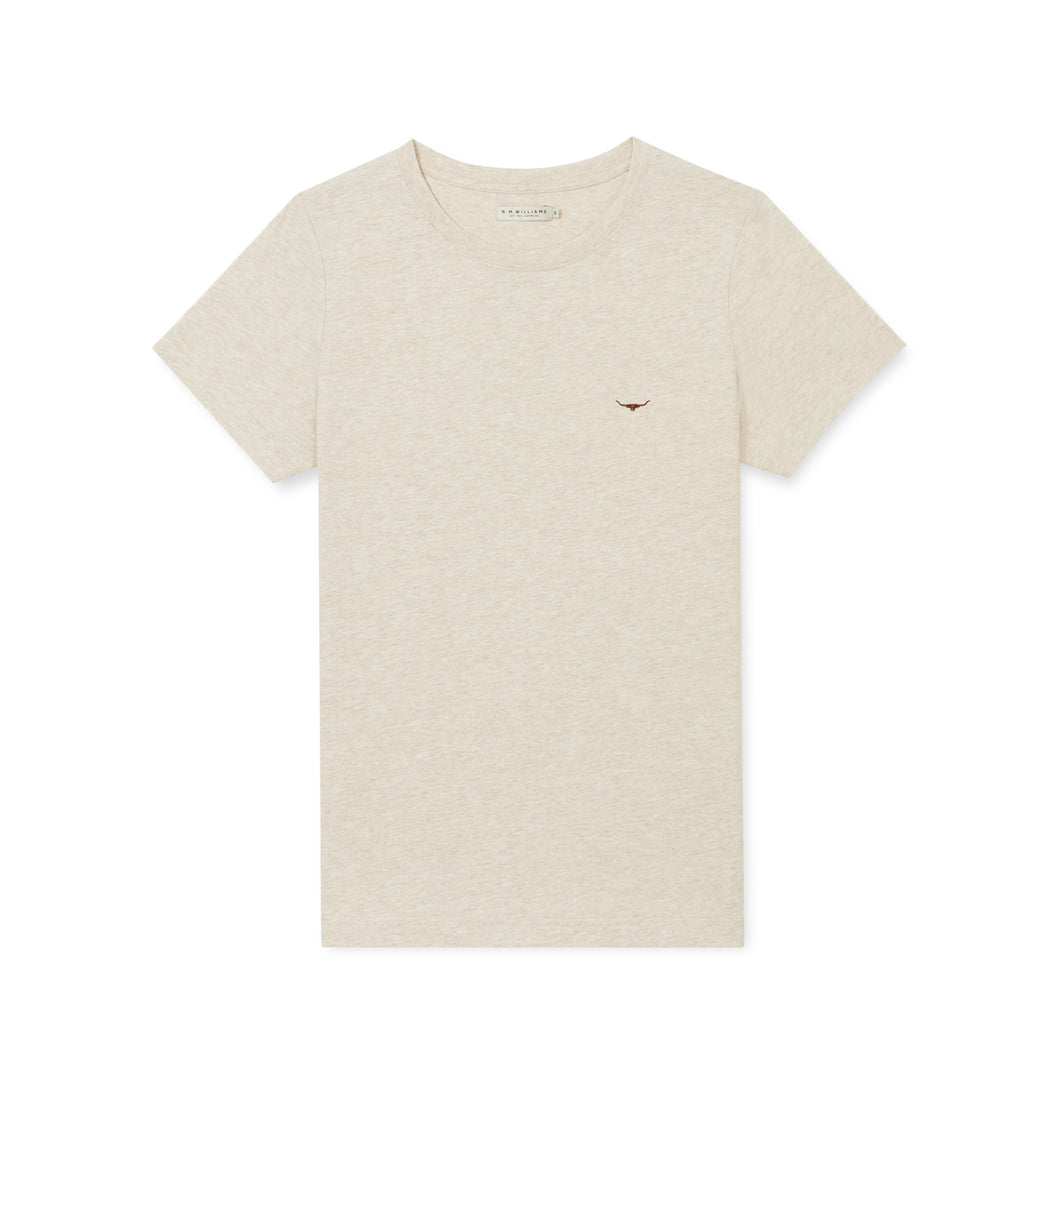 RM Williams Piccadilly Ladies T-shirt